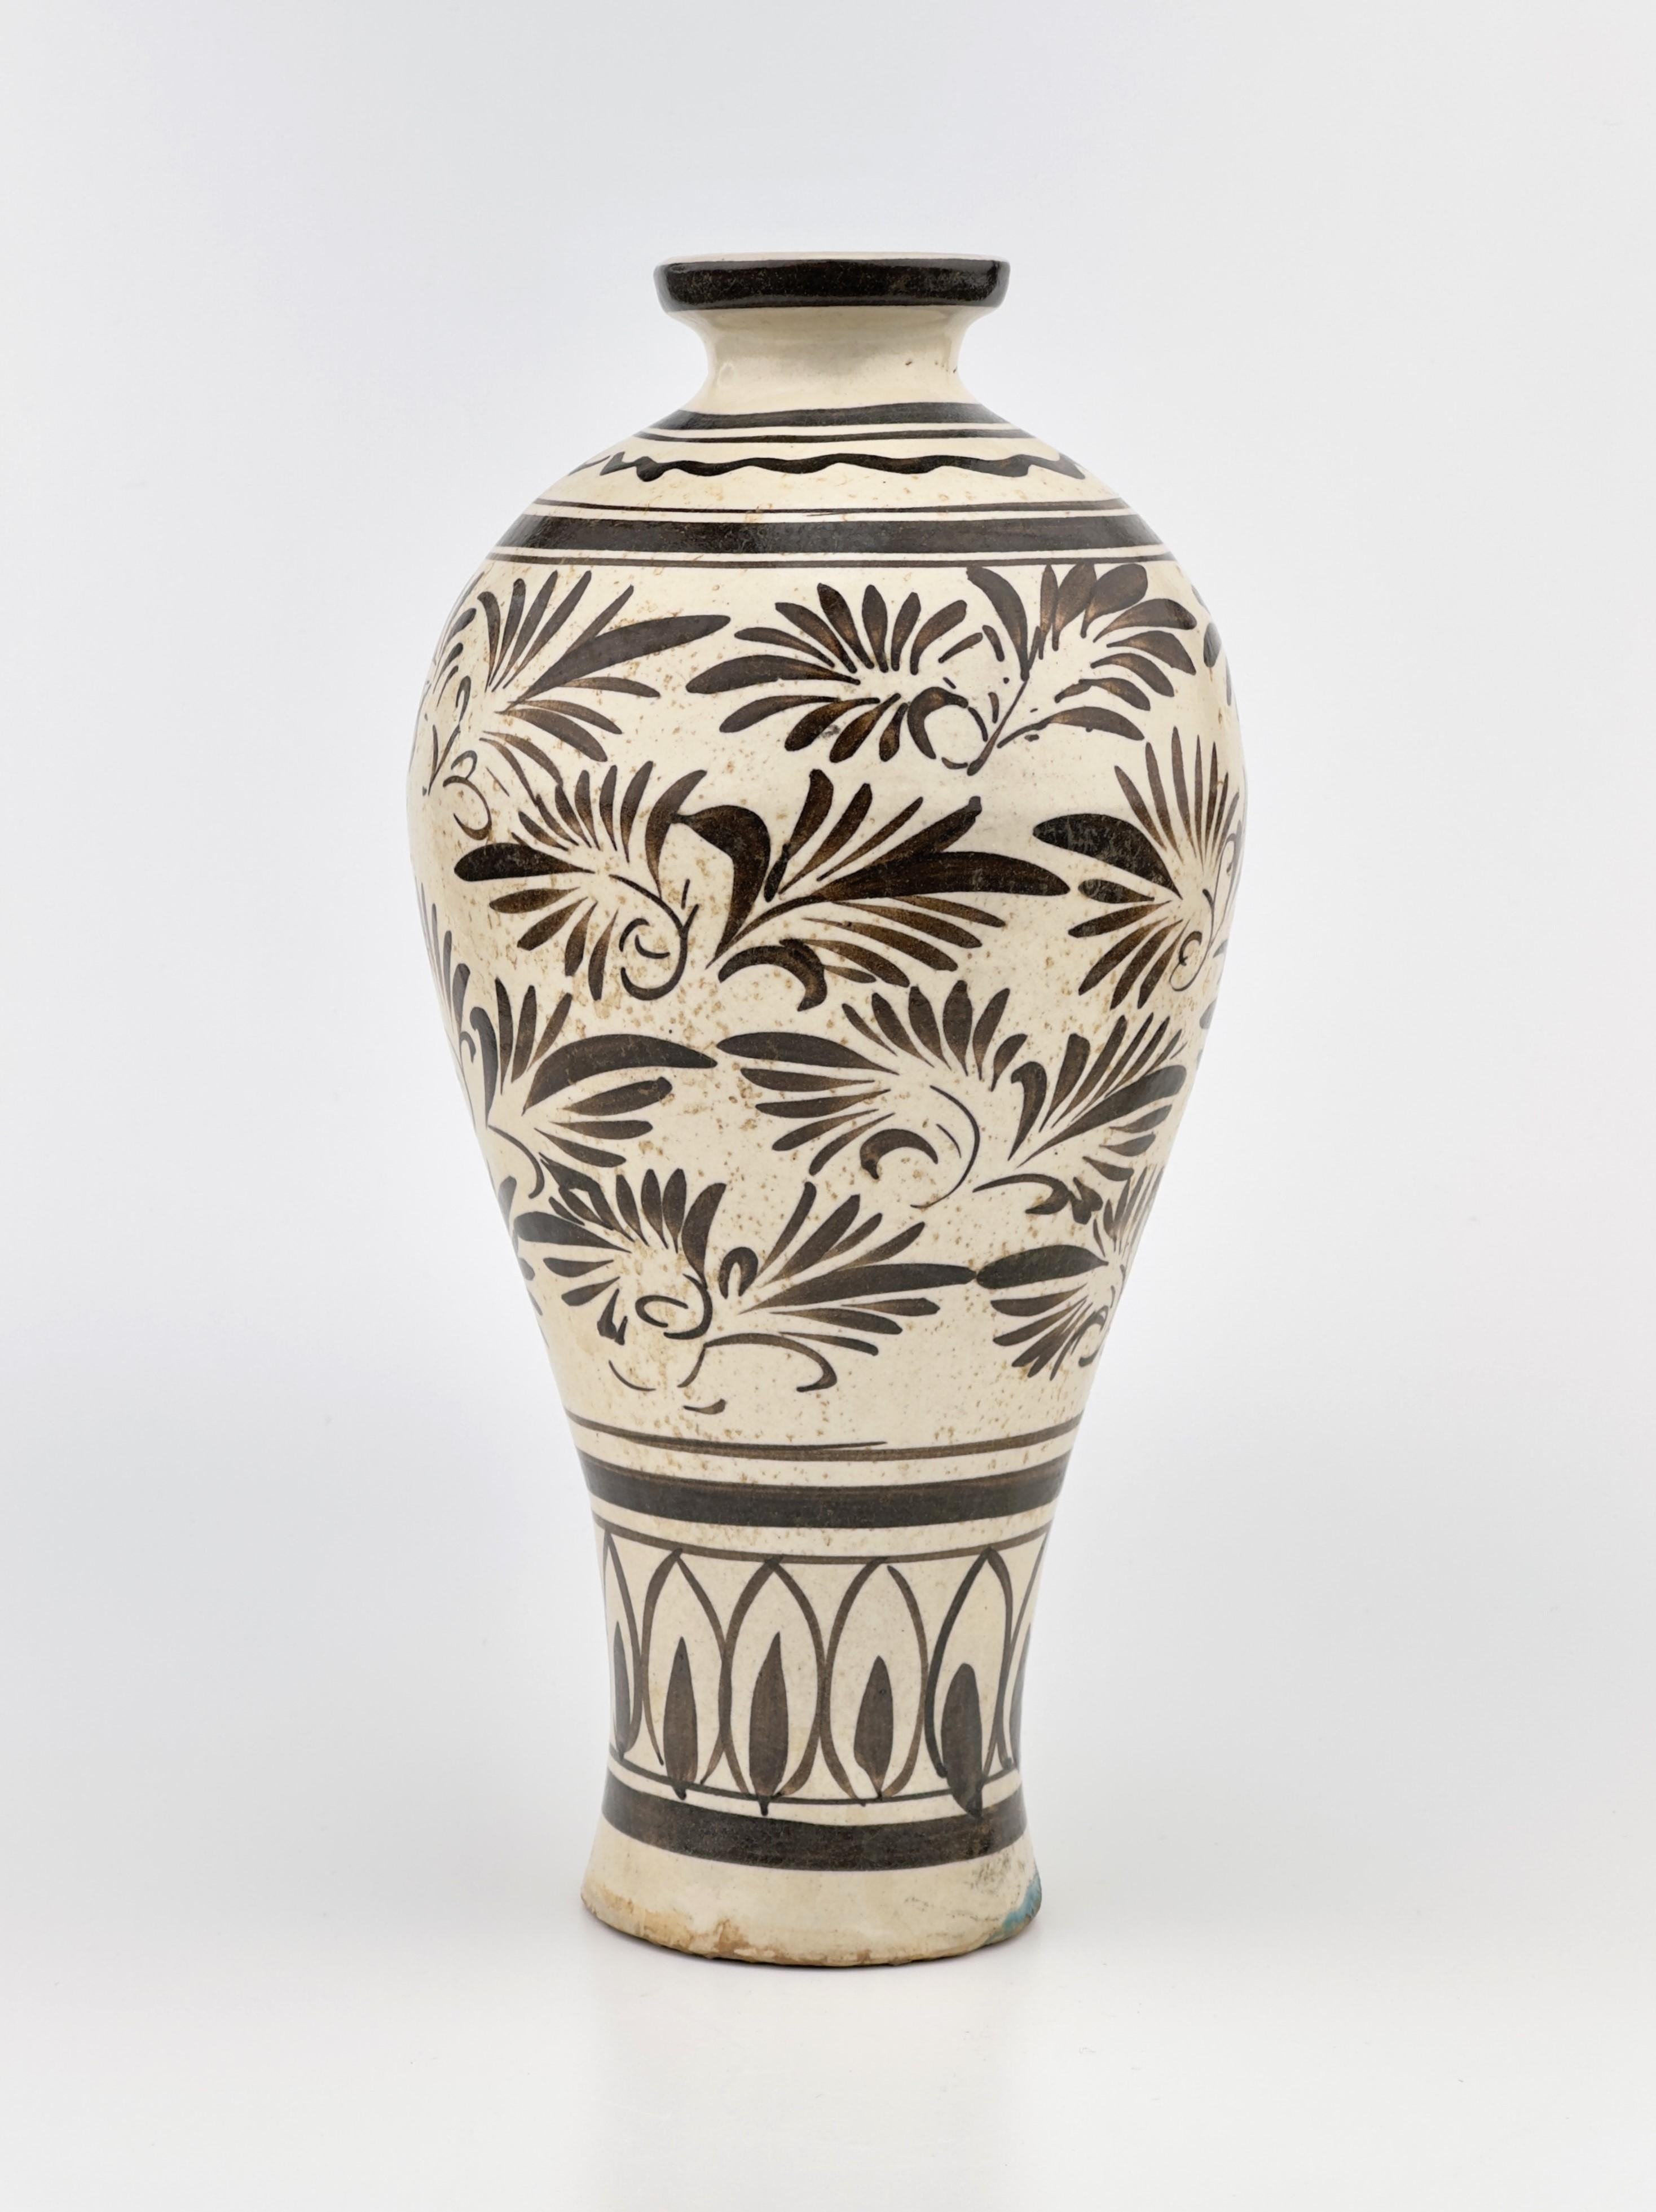 The elongated body is fluidly painted in brown on a white slip and under a clear glaze with a broad band of abstract floral scroll between a band of upright petals below and further chain-like decoration on the shoulder.

Period : Yuan